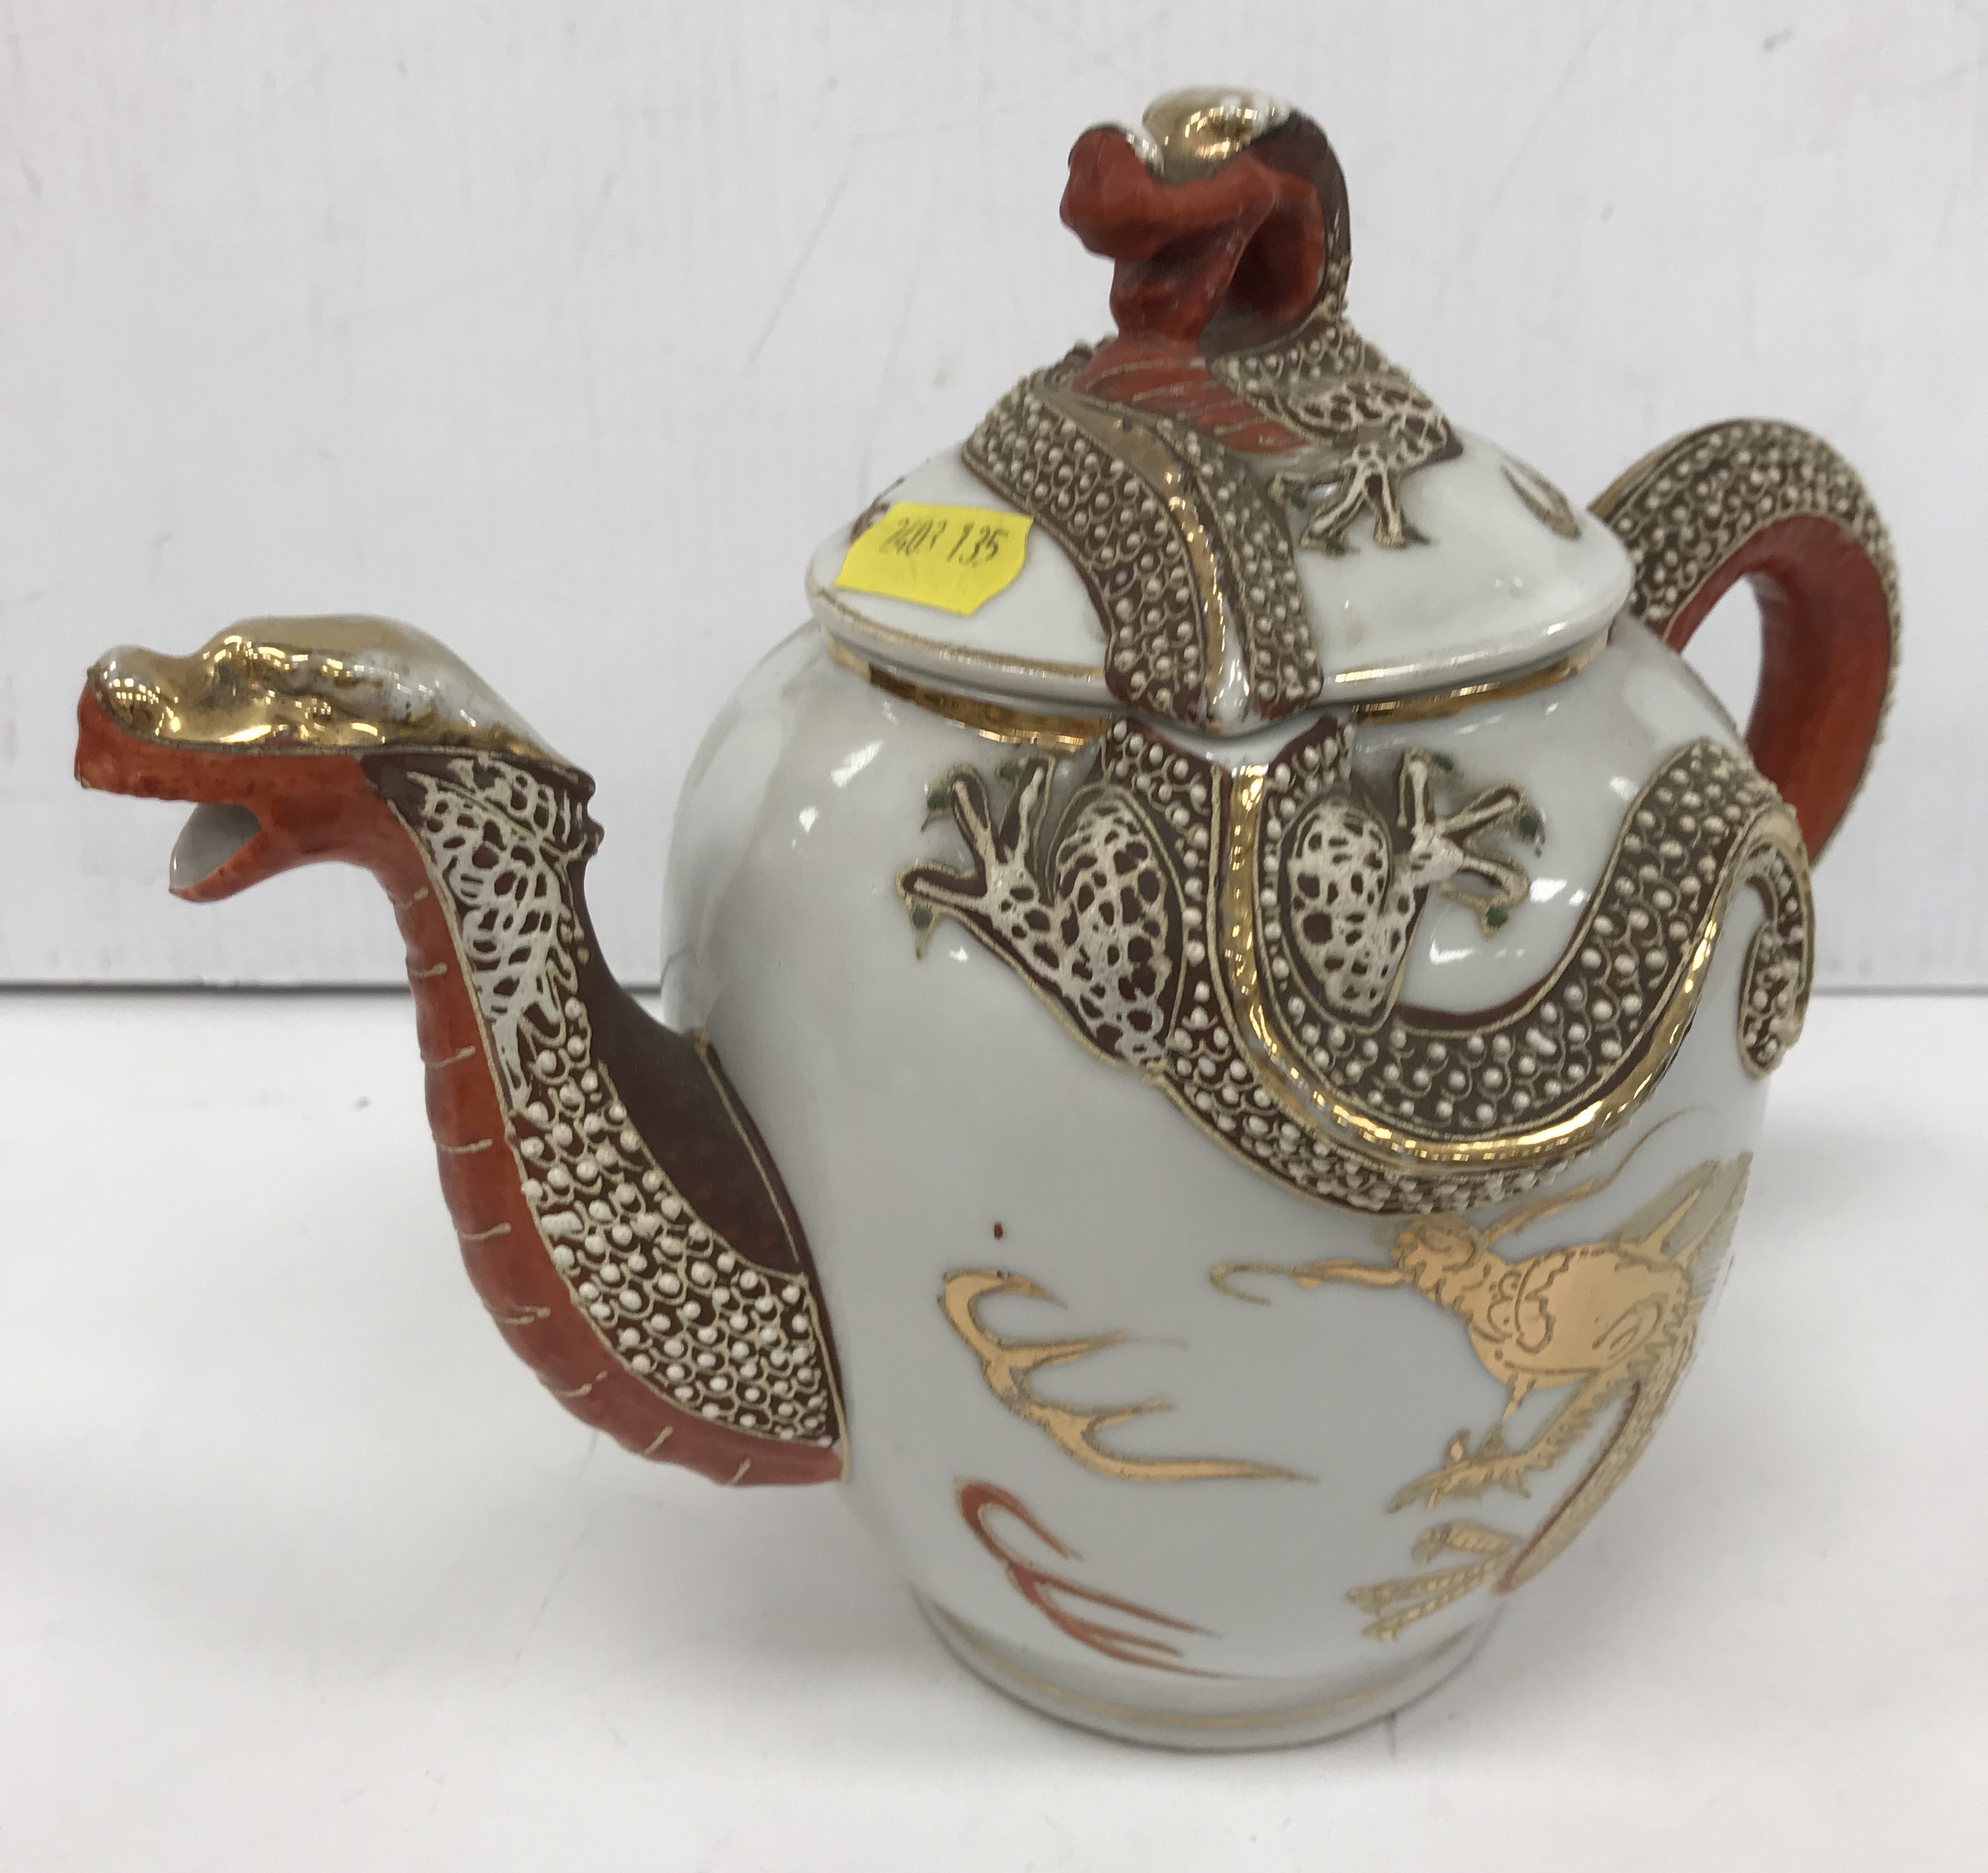 A collection of various Japanese and Chinese pottery and porcelain including a Japanese dragon - Image 4 of 10